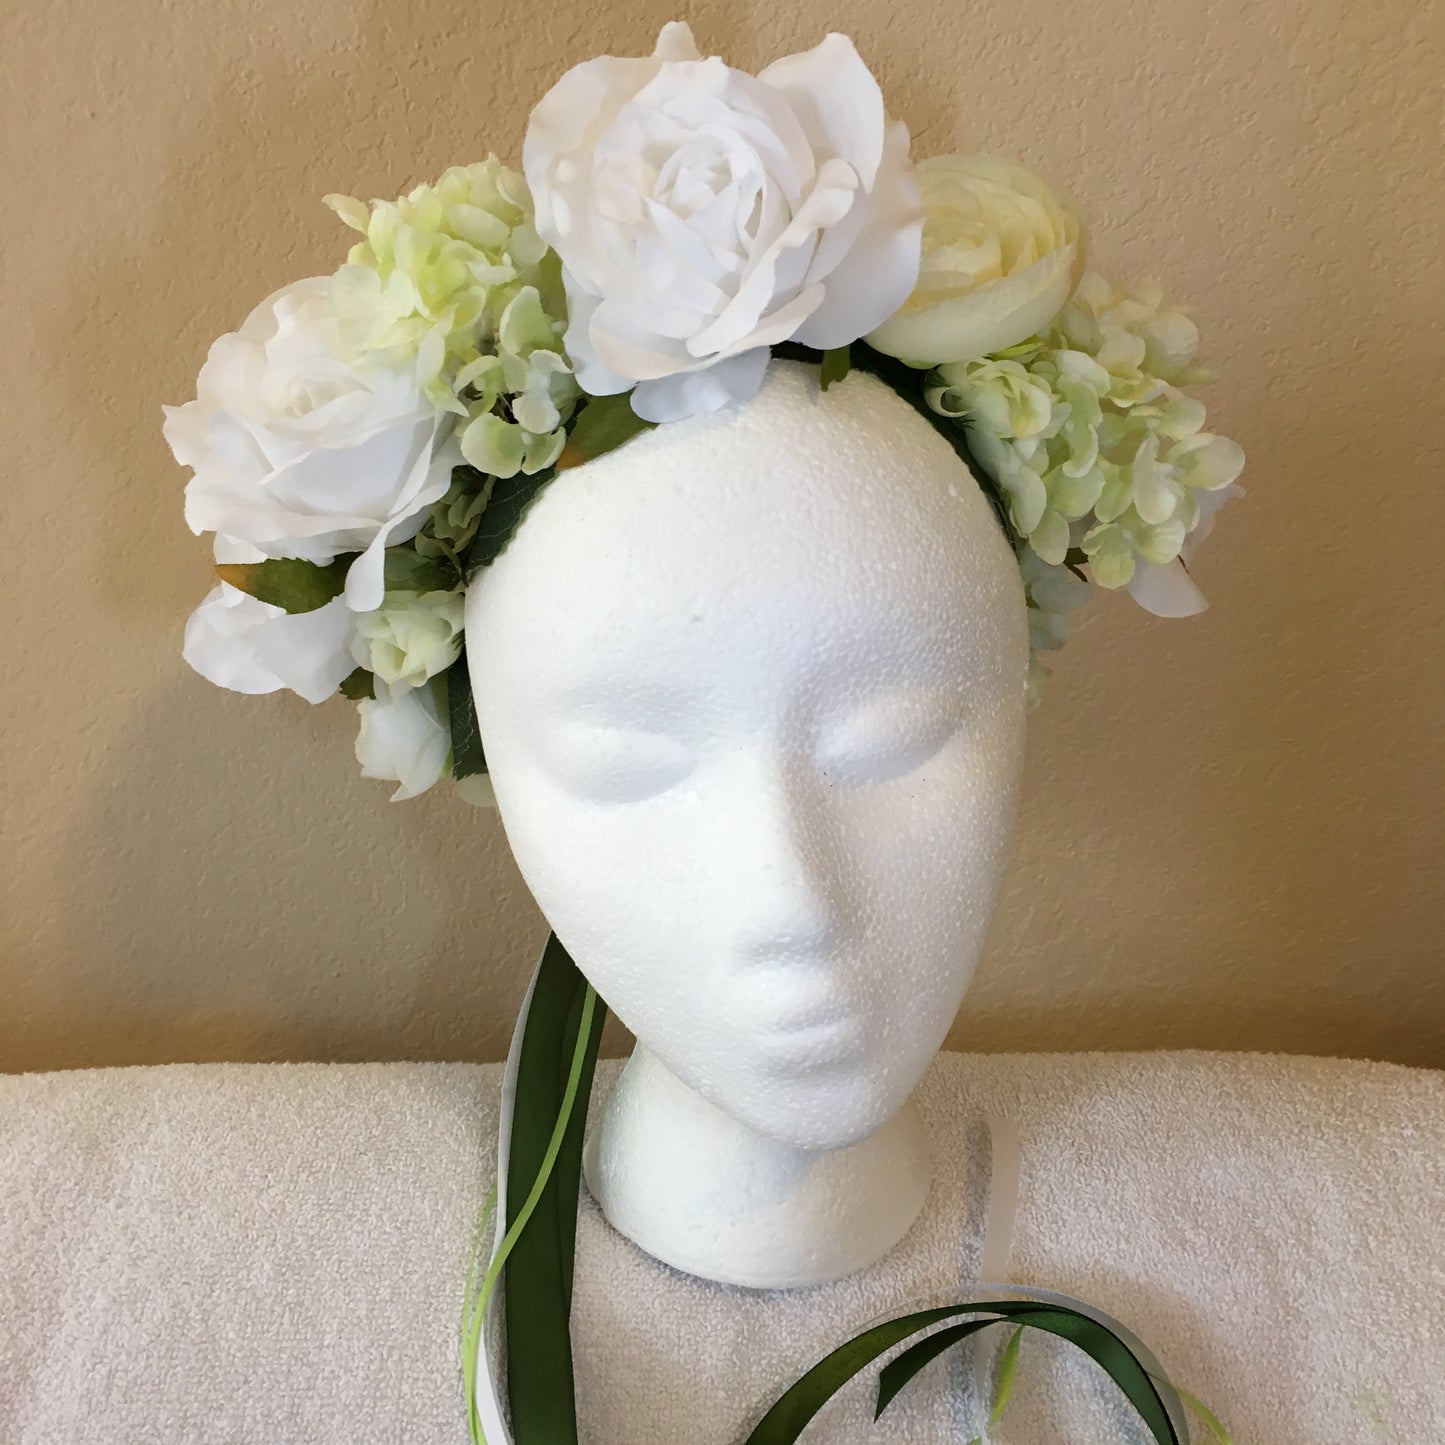 Large Wreath - Pale little greens flowers w/ white roses